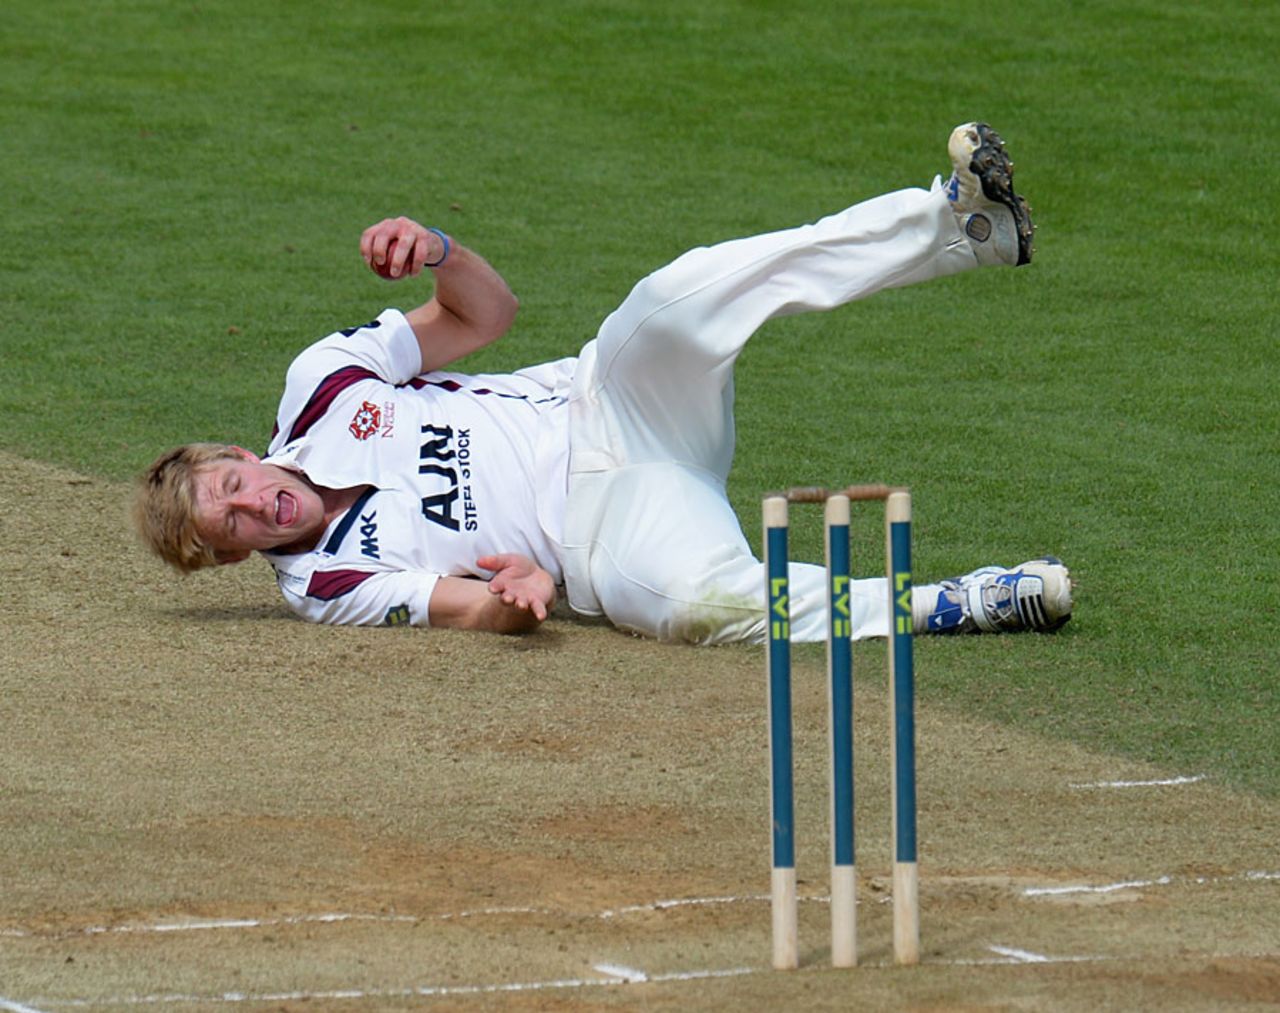 David Willey grabs a return catch, Northamptonshire v Essex, County Championship, Division Two, Northampton, 3rd day, April 19, 2013